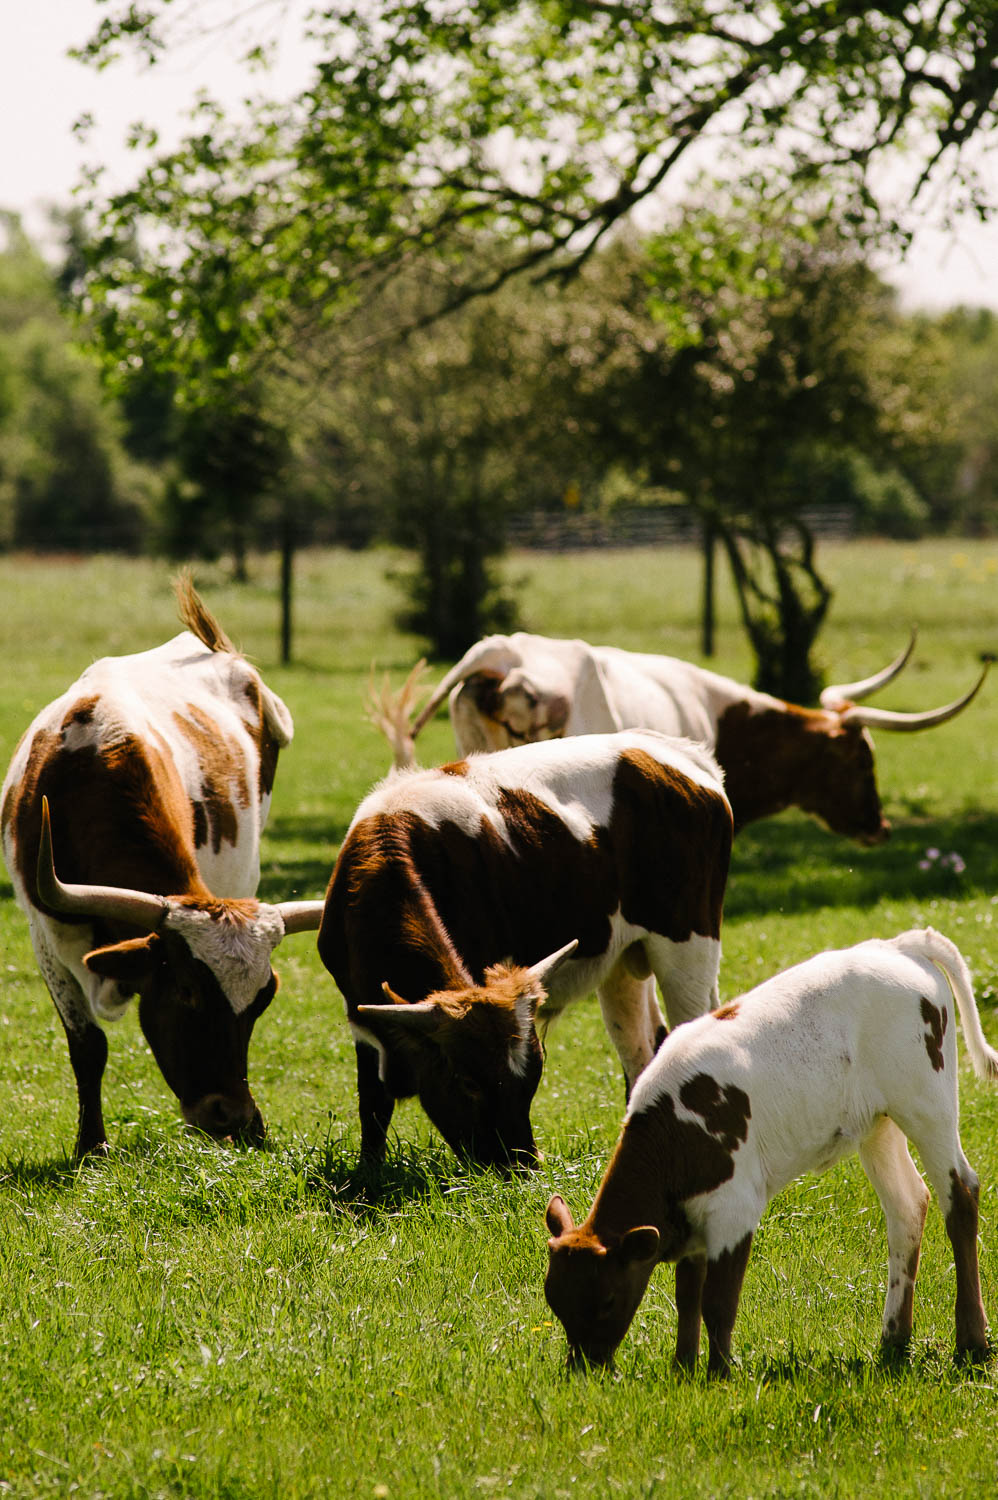 Cows and bulls at wedding venue Pecan Springs Houston Texas photo by Philip Thomas Photography